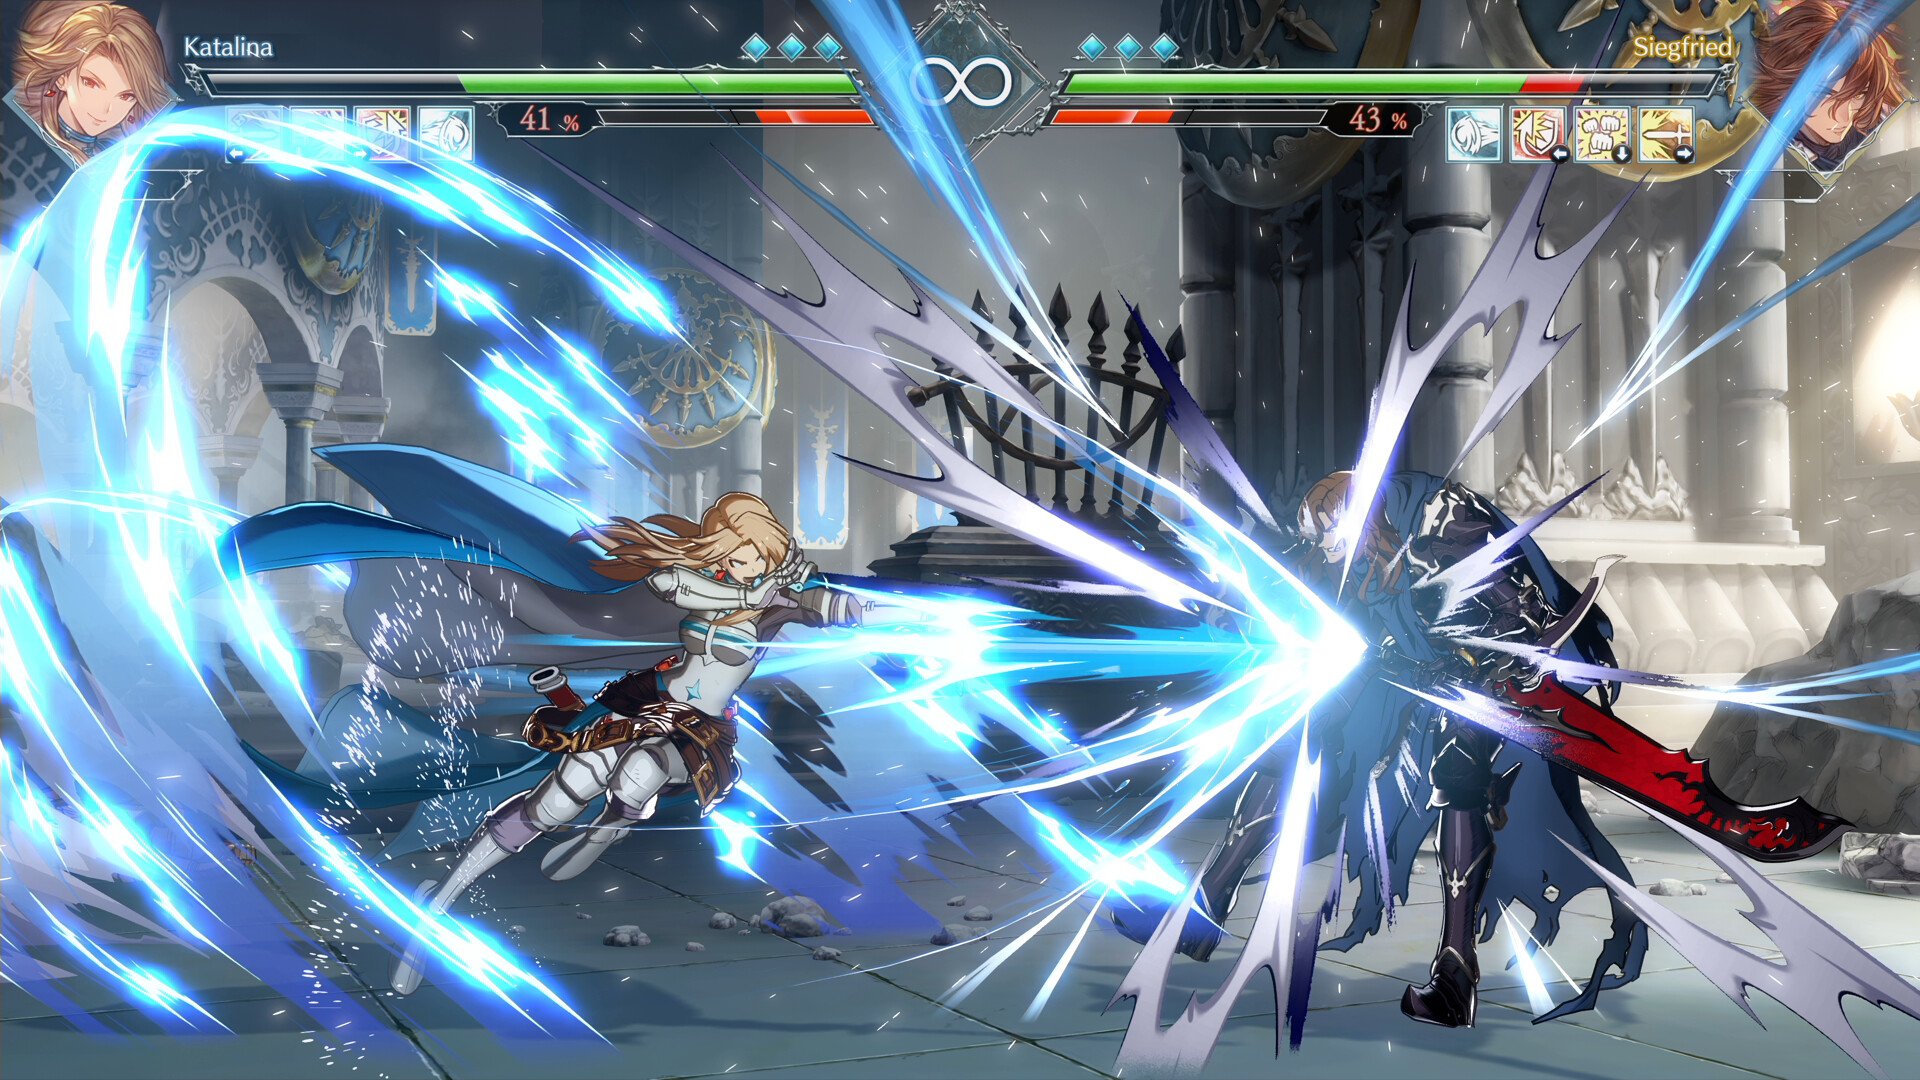 Granblue Fantasy Versus: Rising release date delayed by two weeks